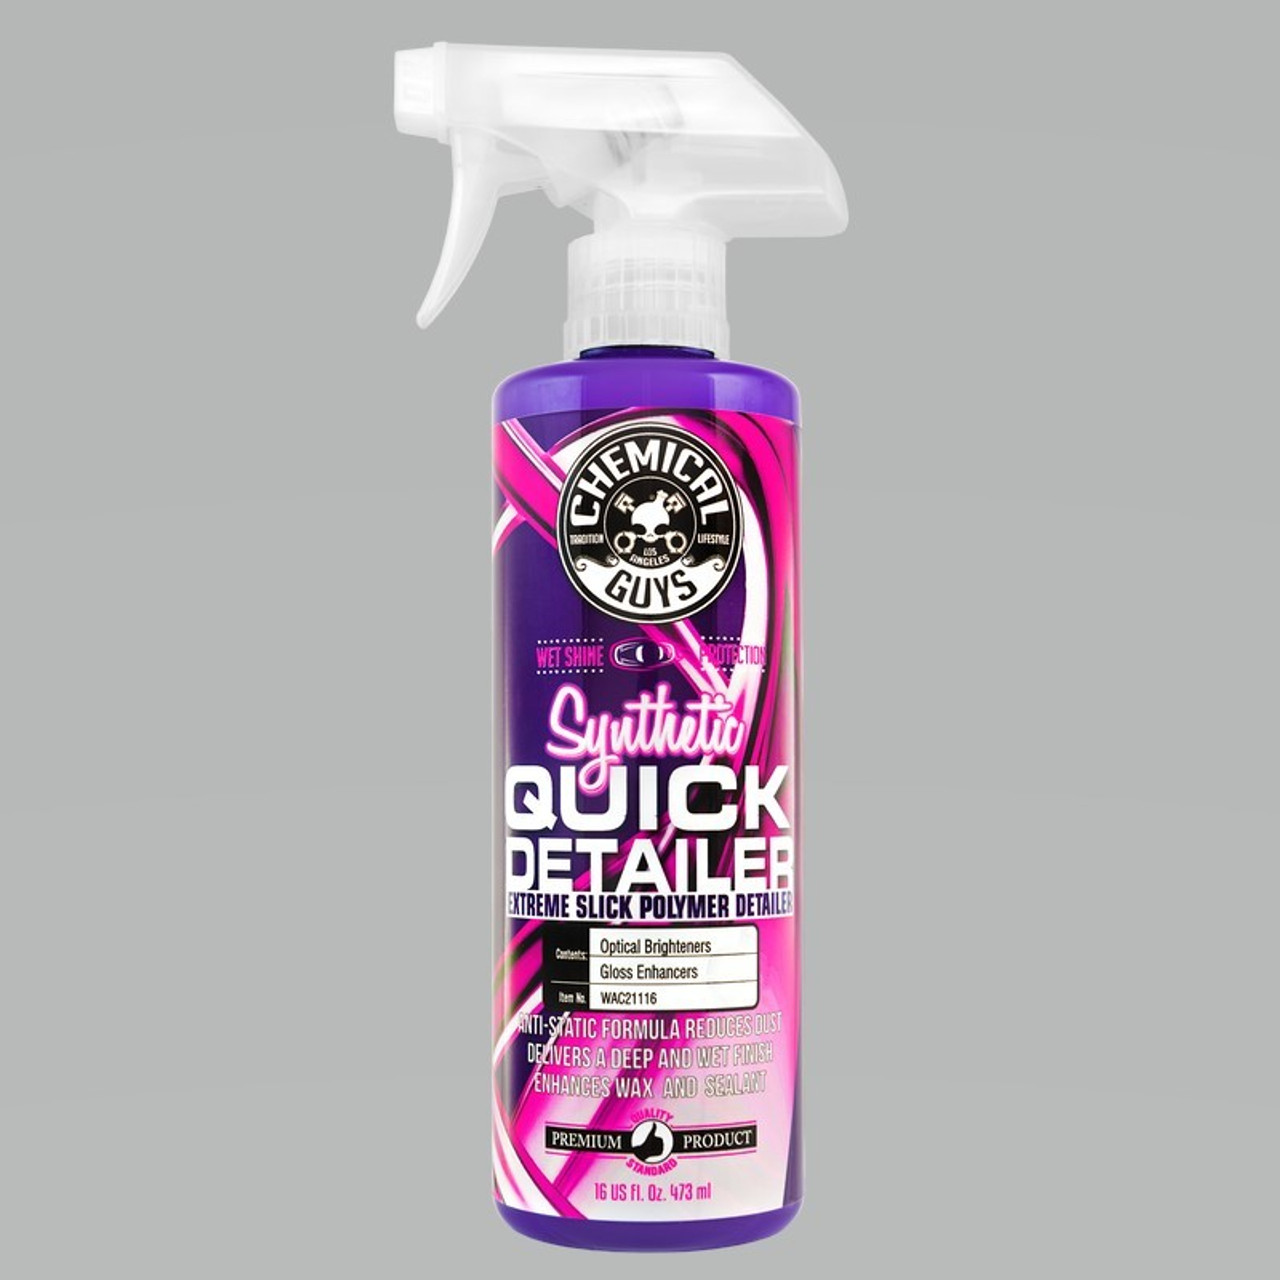 Chemical Guys InnerClean Quick Detailer and Protectant 16 oz